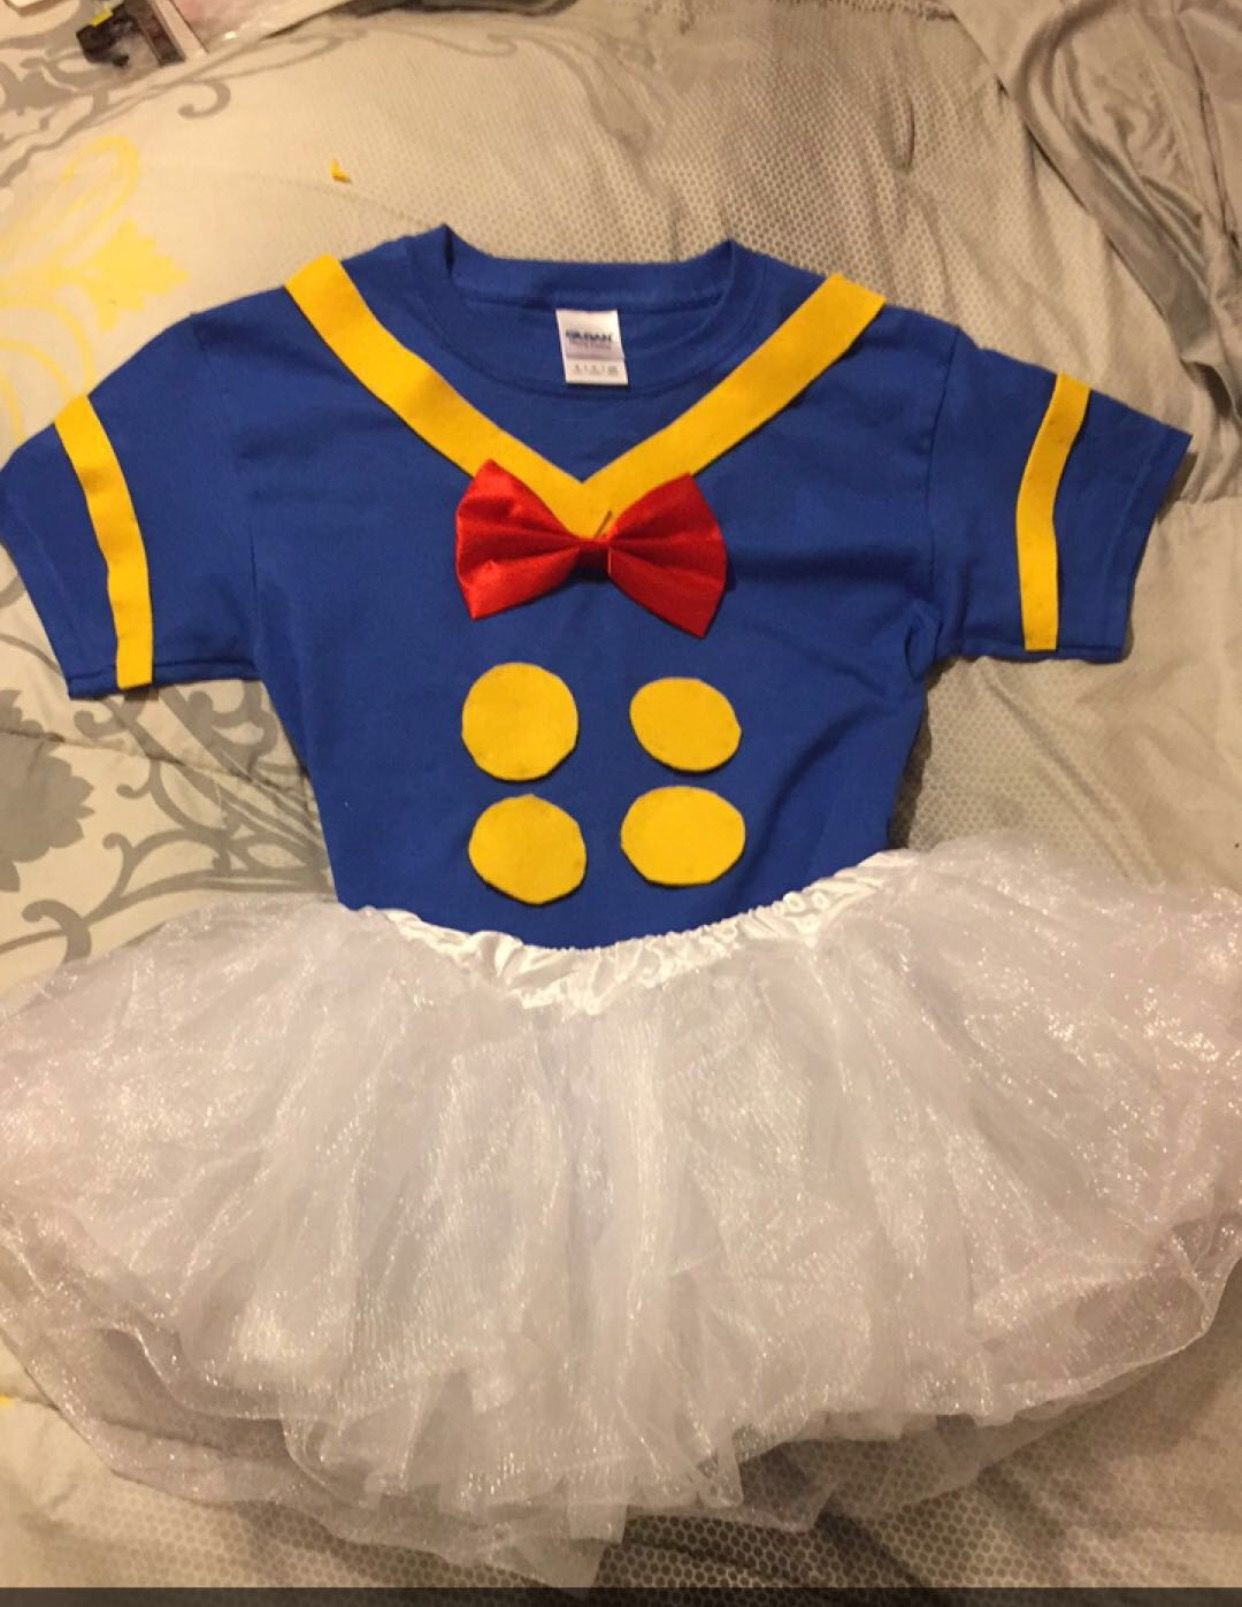 DIY Donald Duck Costume
 Finished Product Donald Duck Costume